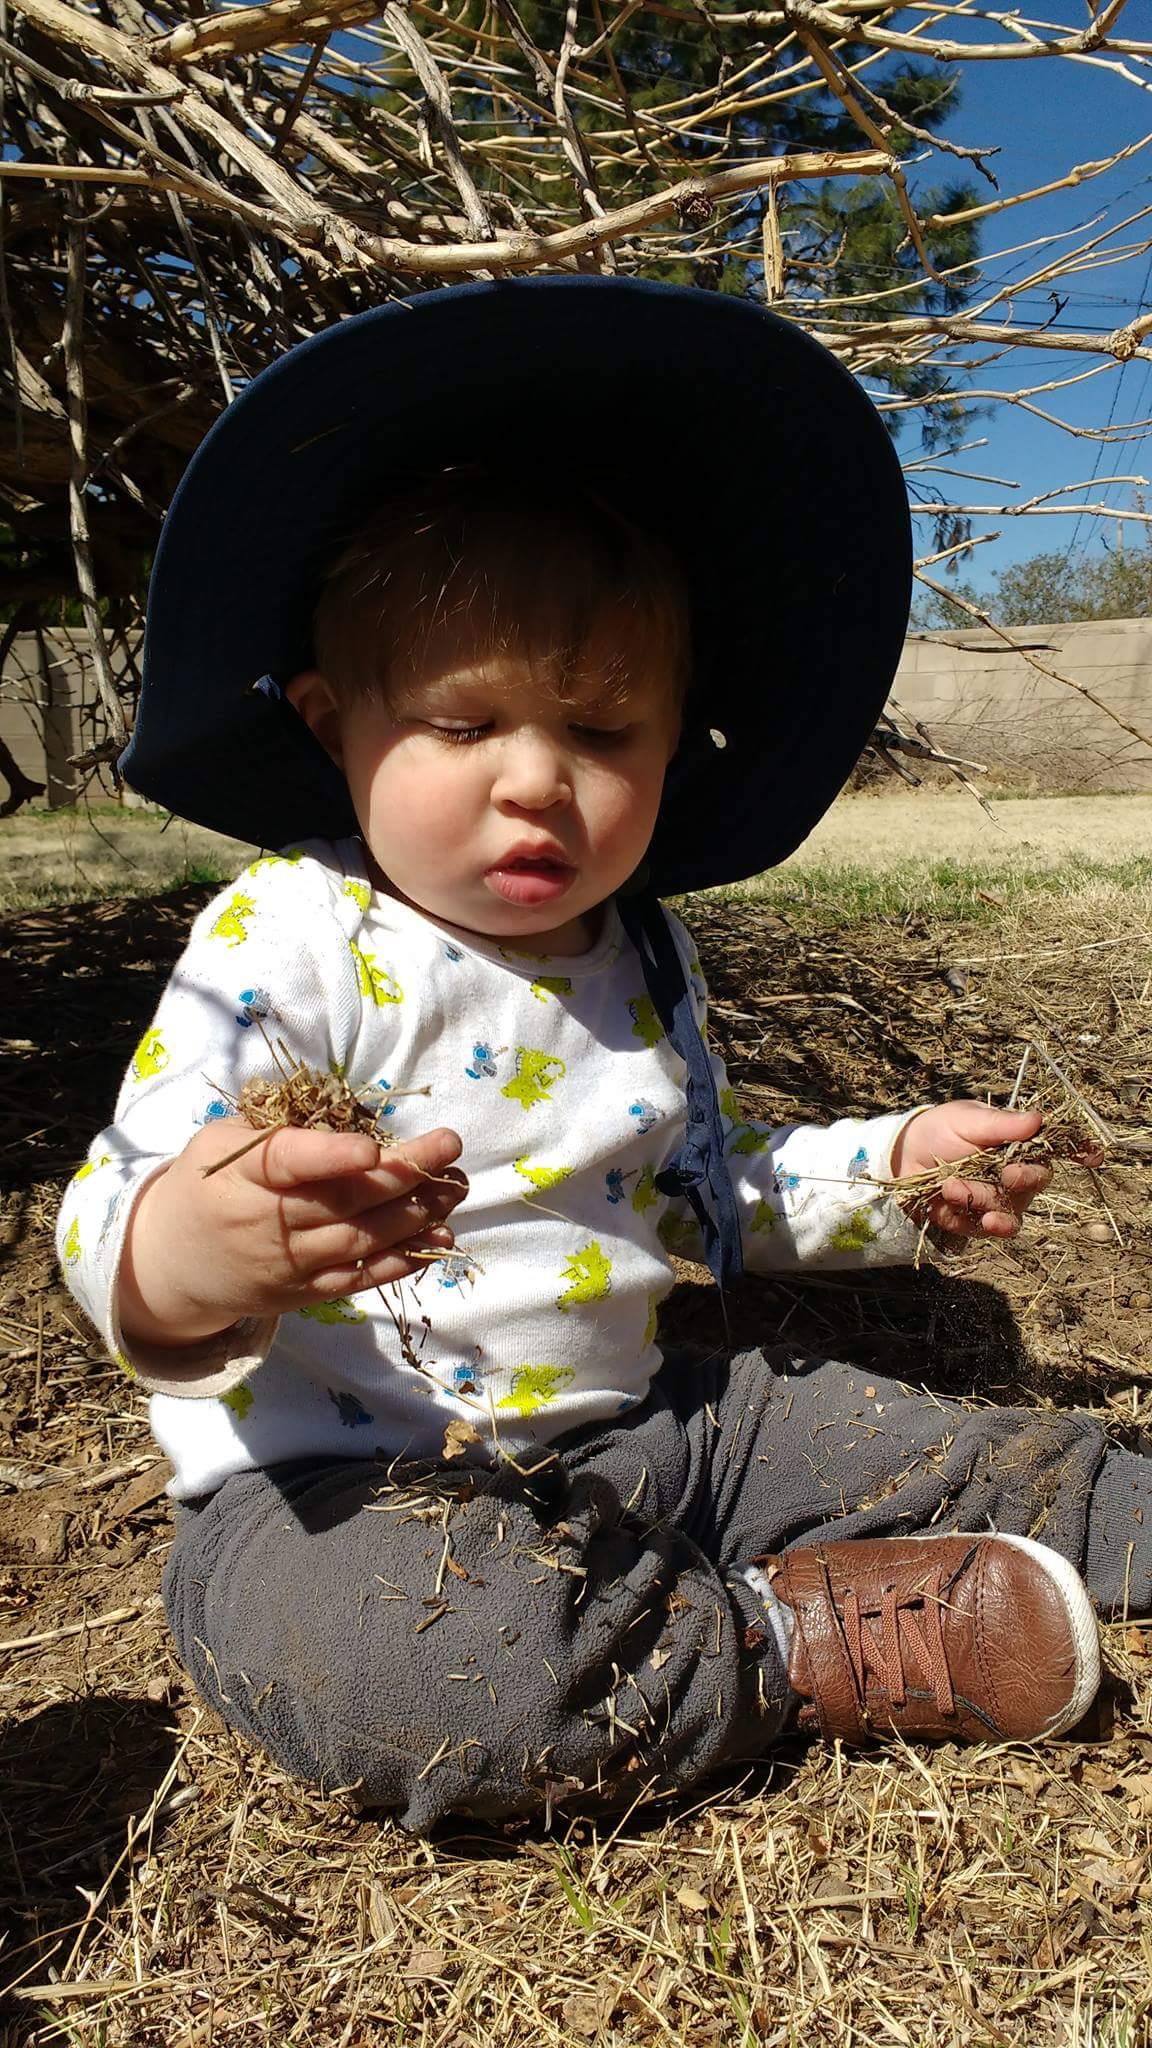 9 month old grasps dried grass while sitting on the ground.